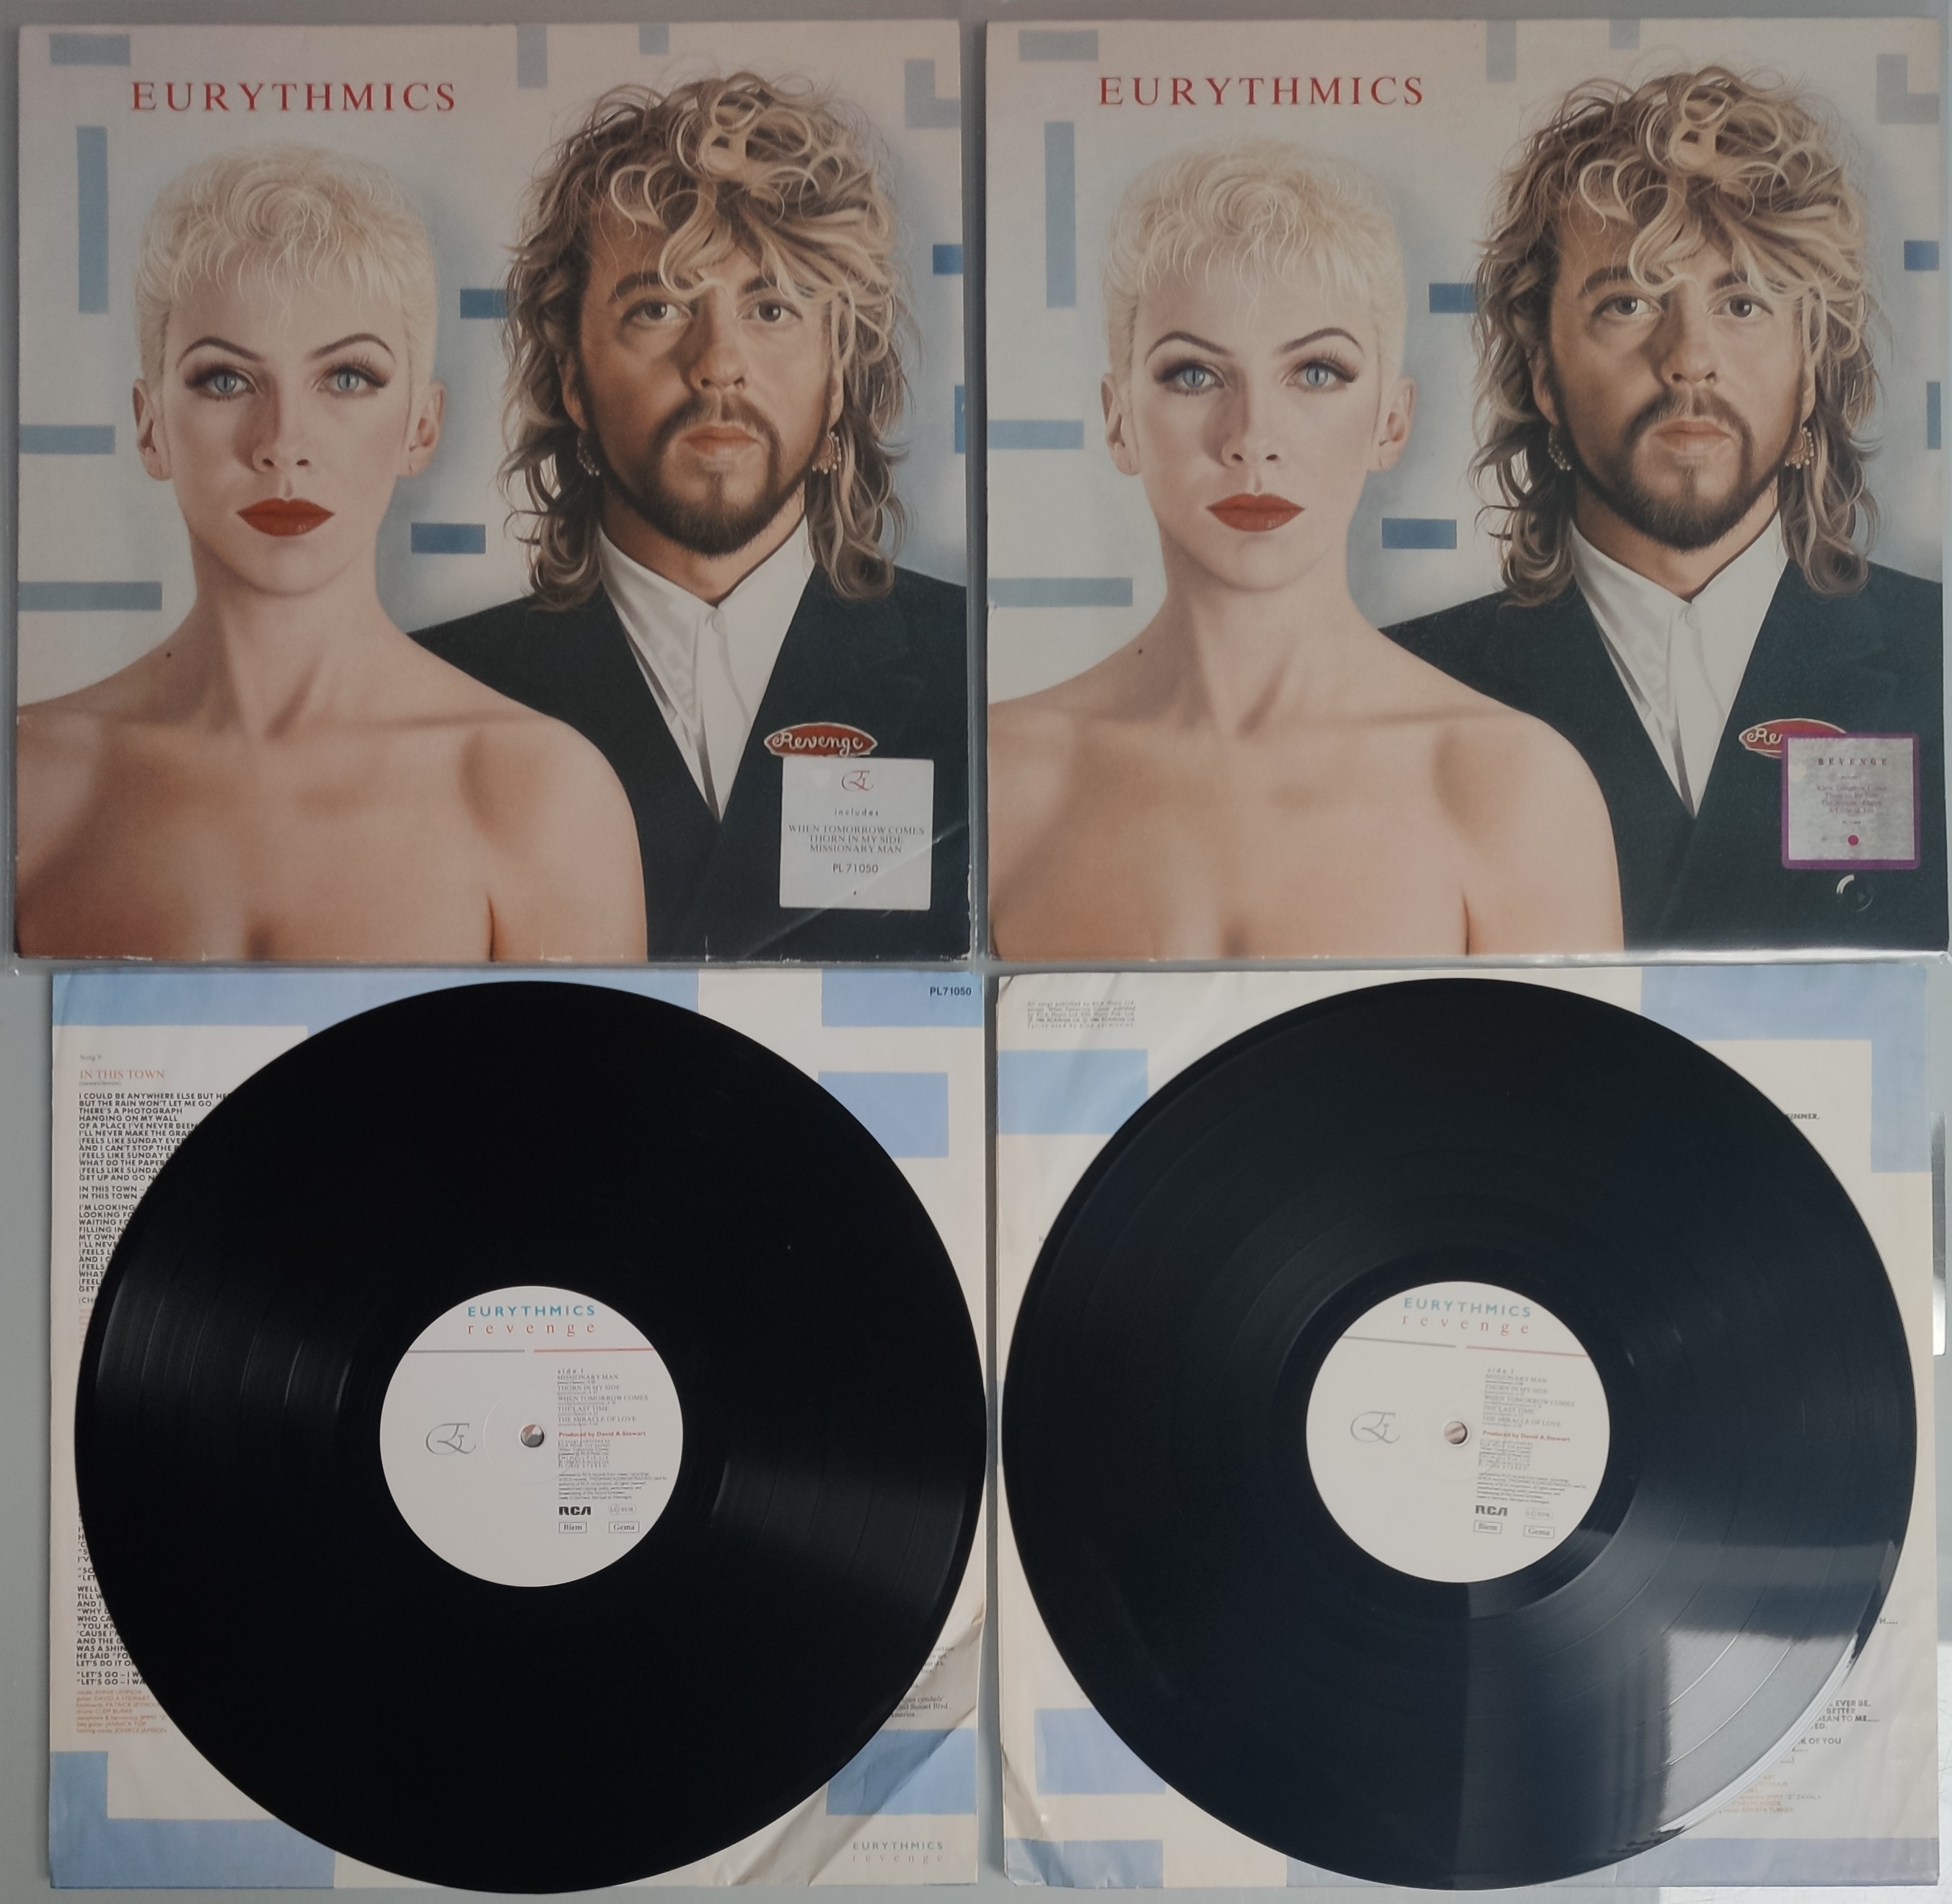 A Collection of 12 x Eurythmics / Annie Lennox New Wave Vinyl LPs and 12” Single. - Image 4 of 9